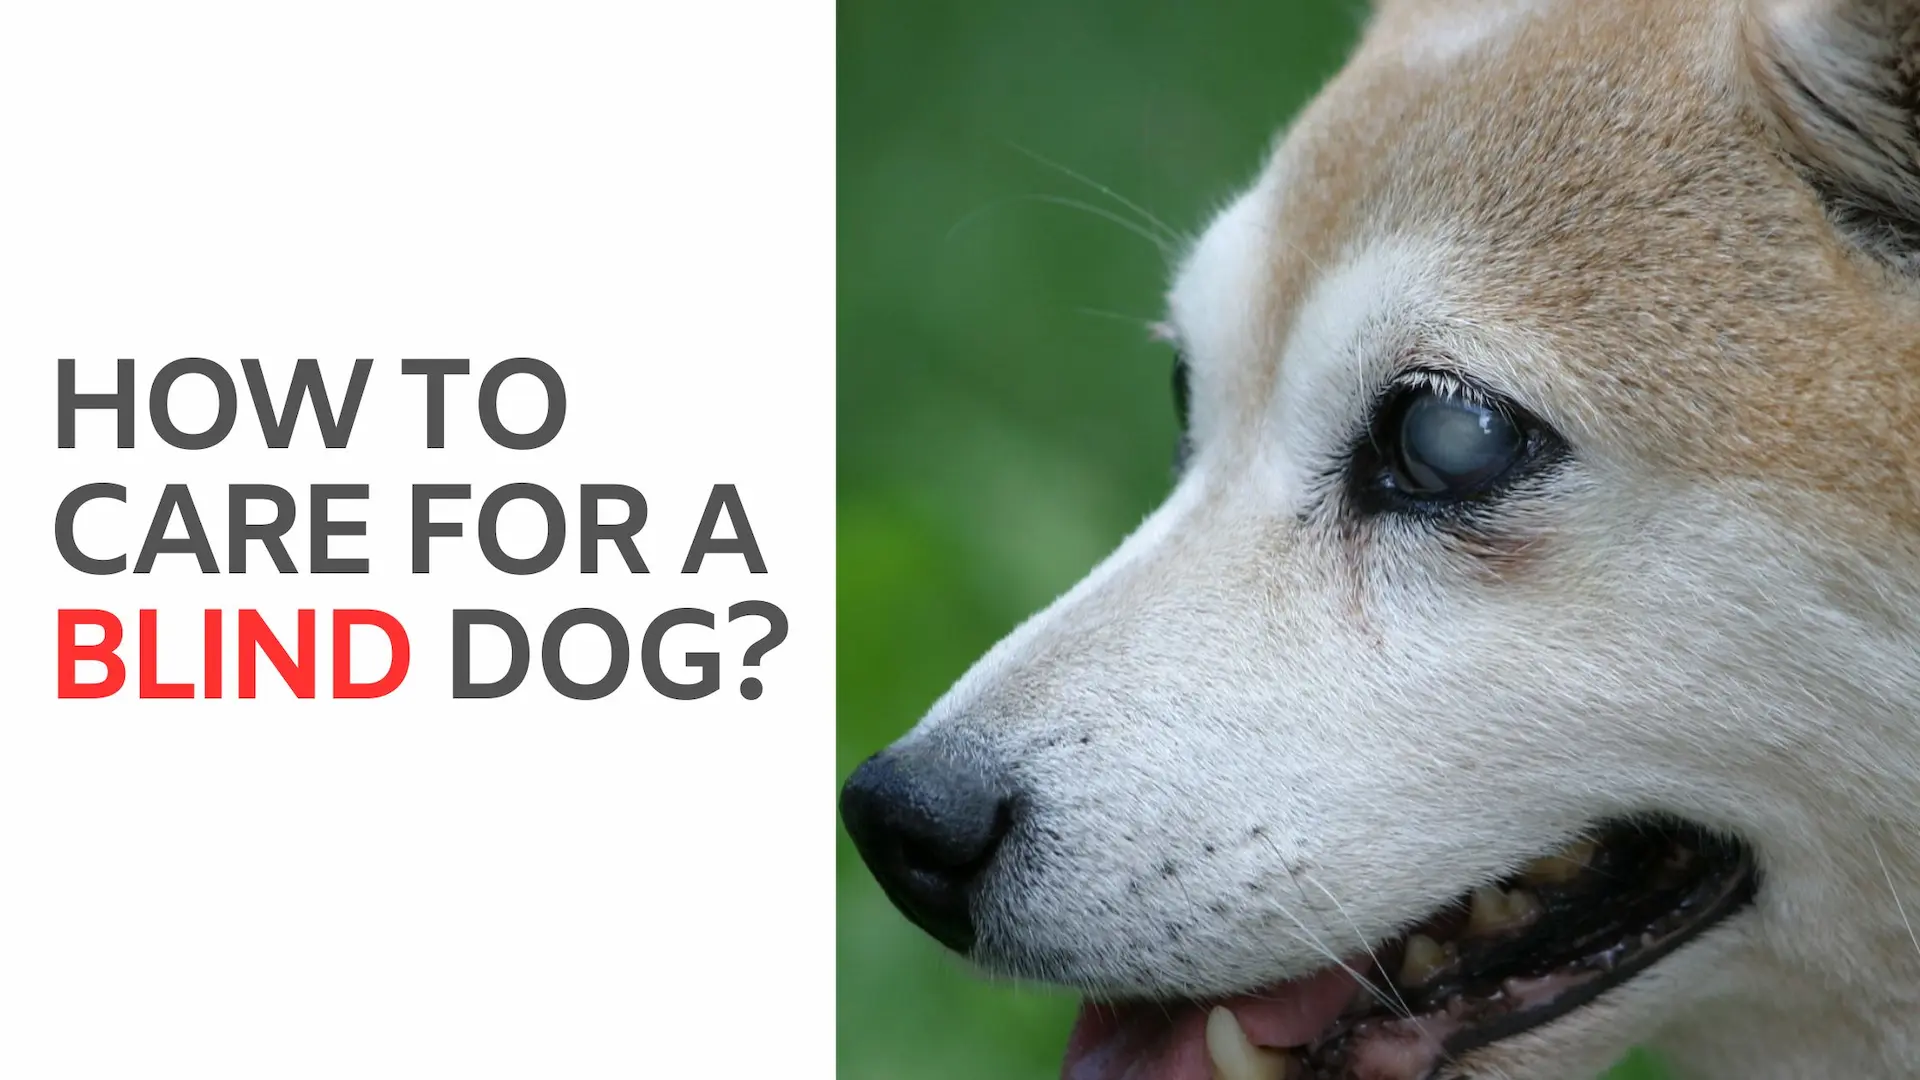 How to Care for a Blind Dog